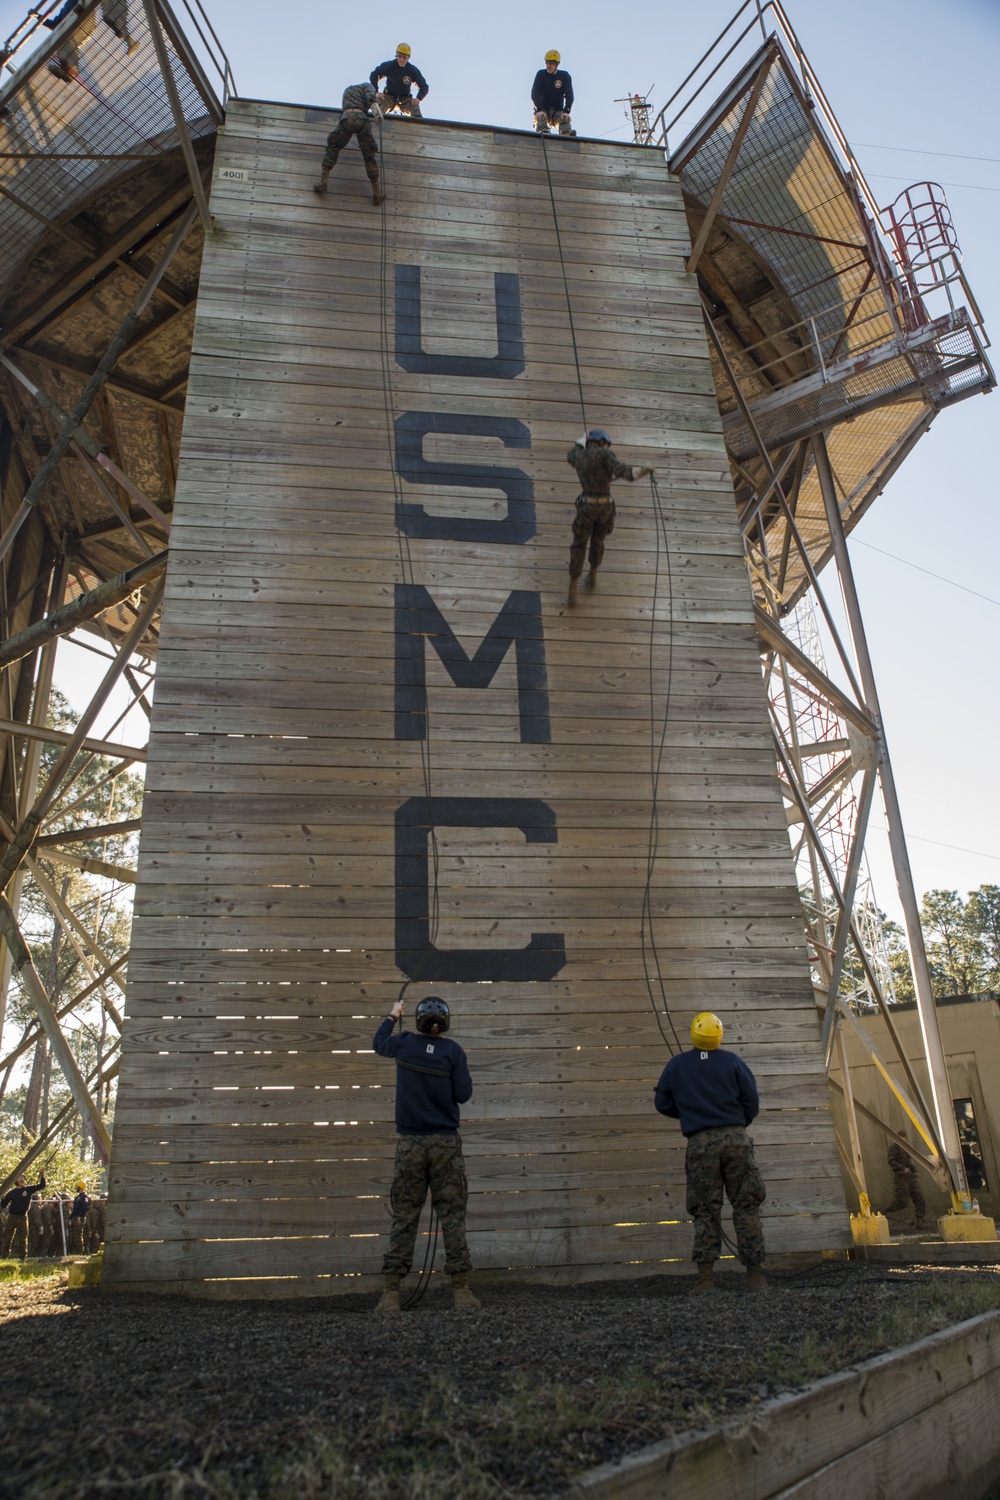 Photo Gallery: Marine recruits test limits, learn to rappel on Parris Island